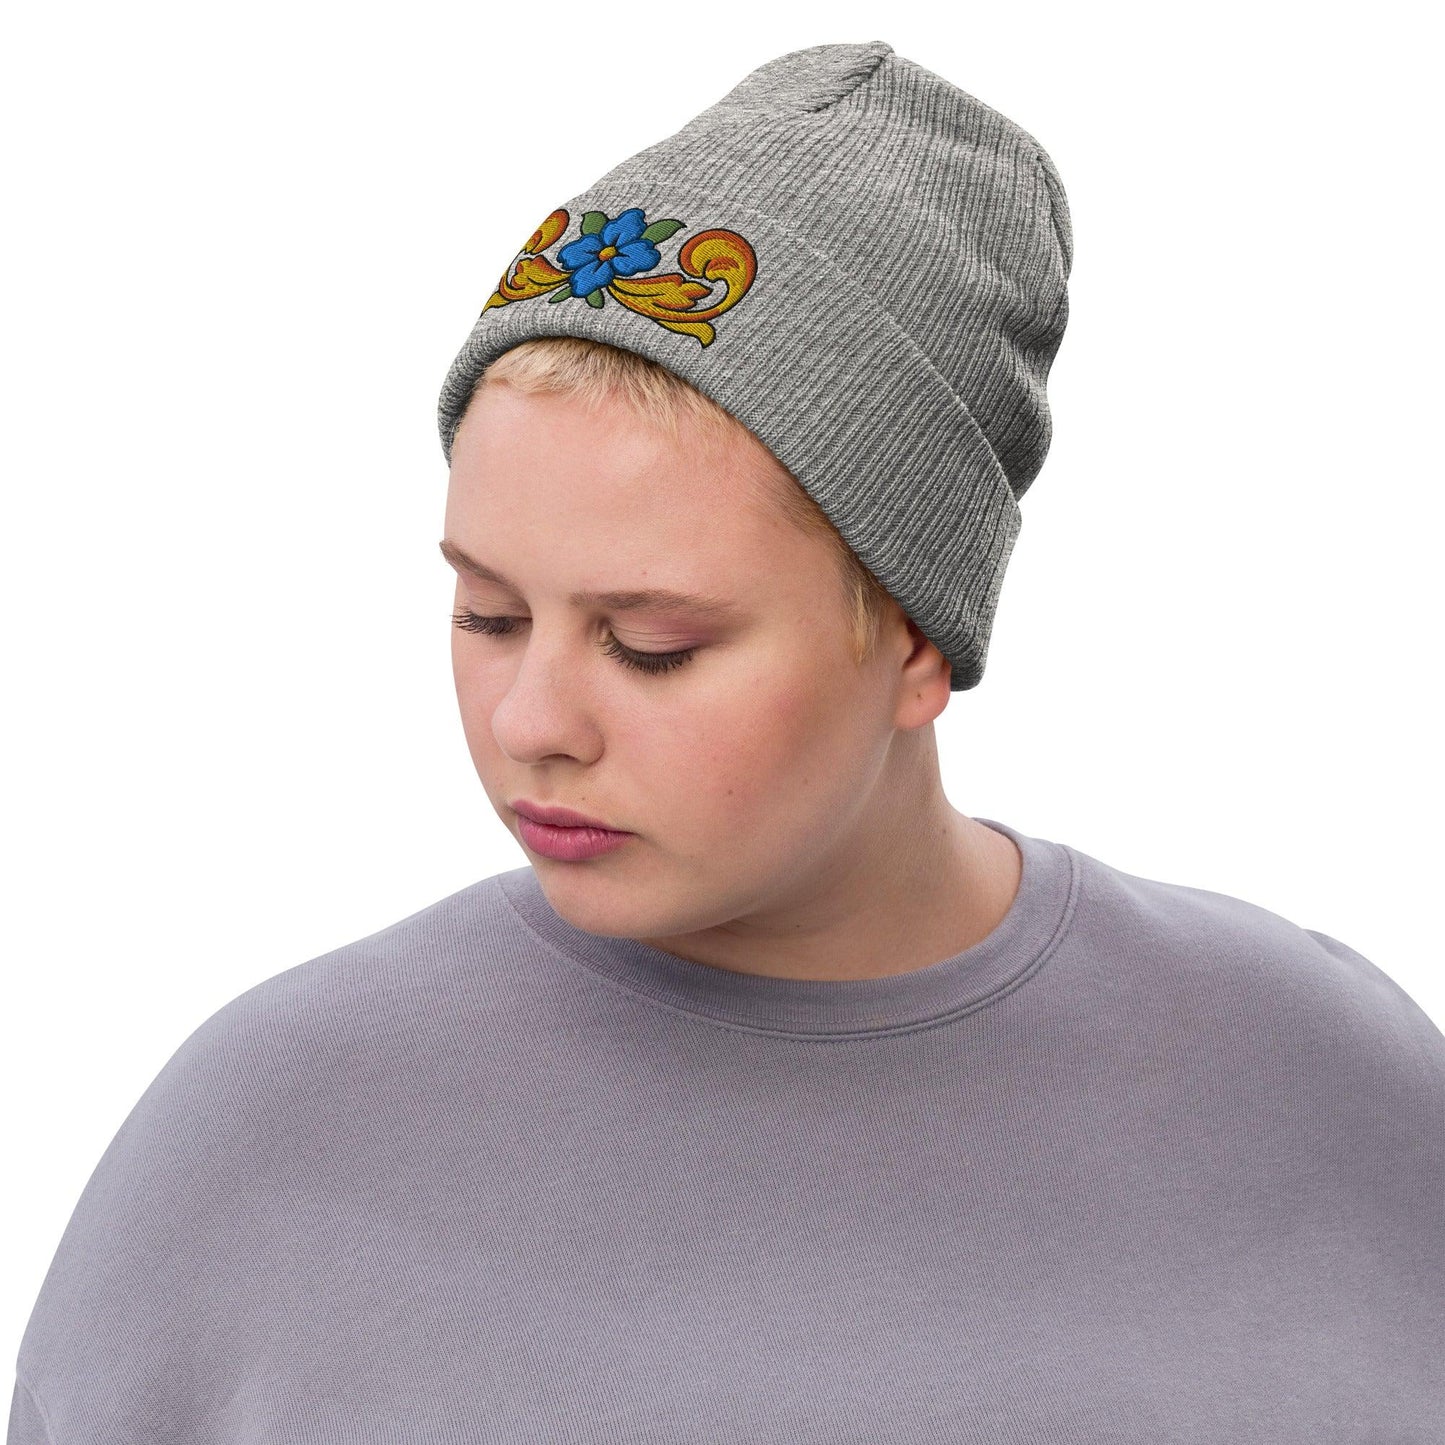 Sicilian Tile Motif Embroidered Beanie - The Global Wanderer